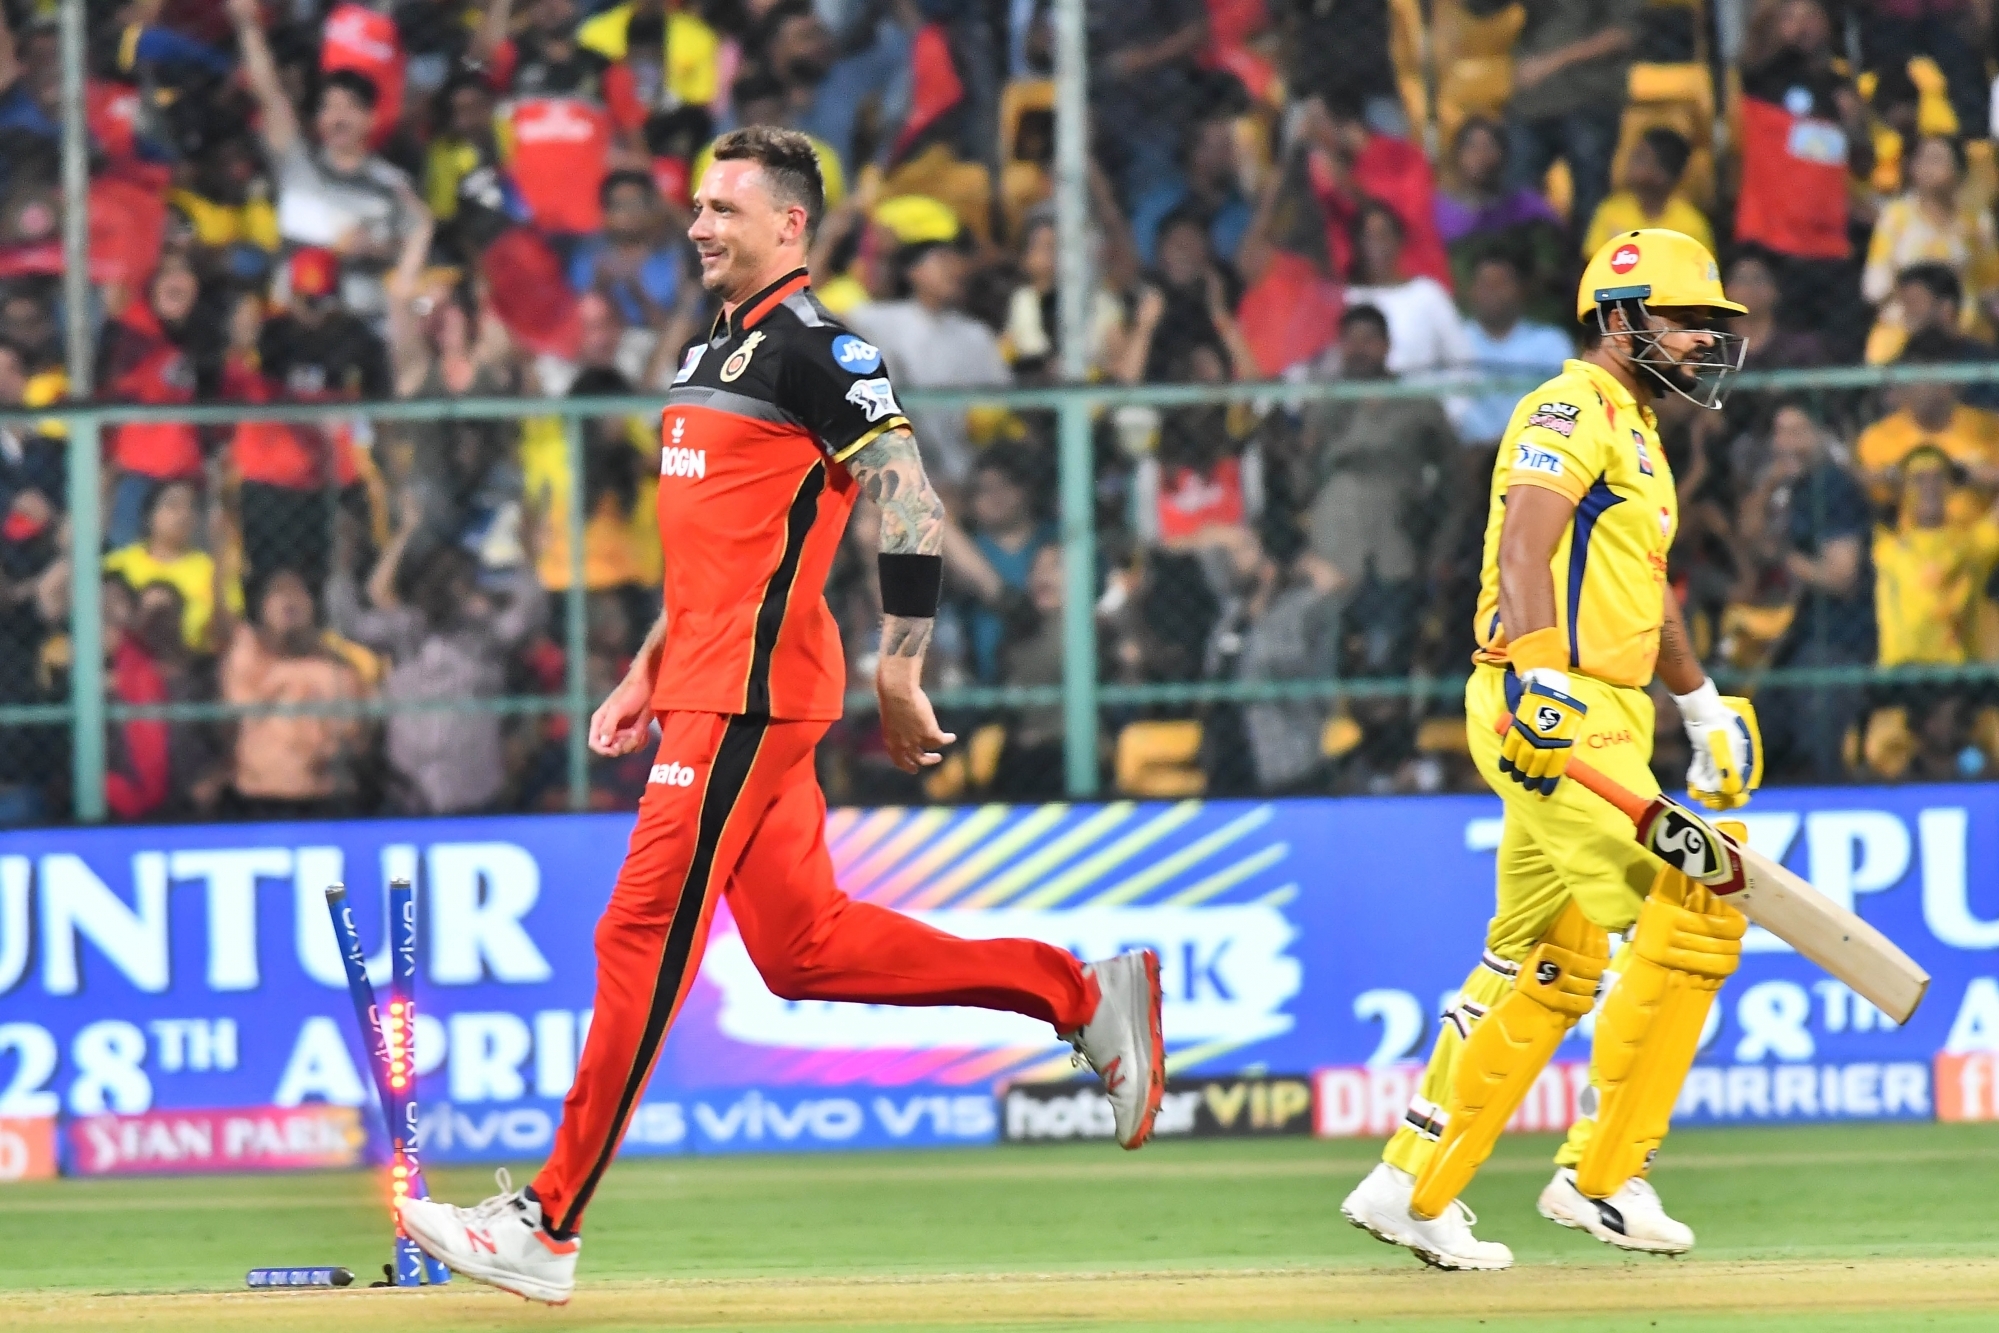 Dale Steyn celebrating a wicket for RCB | IANS